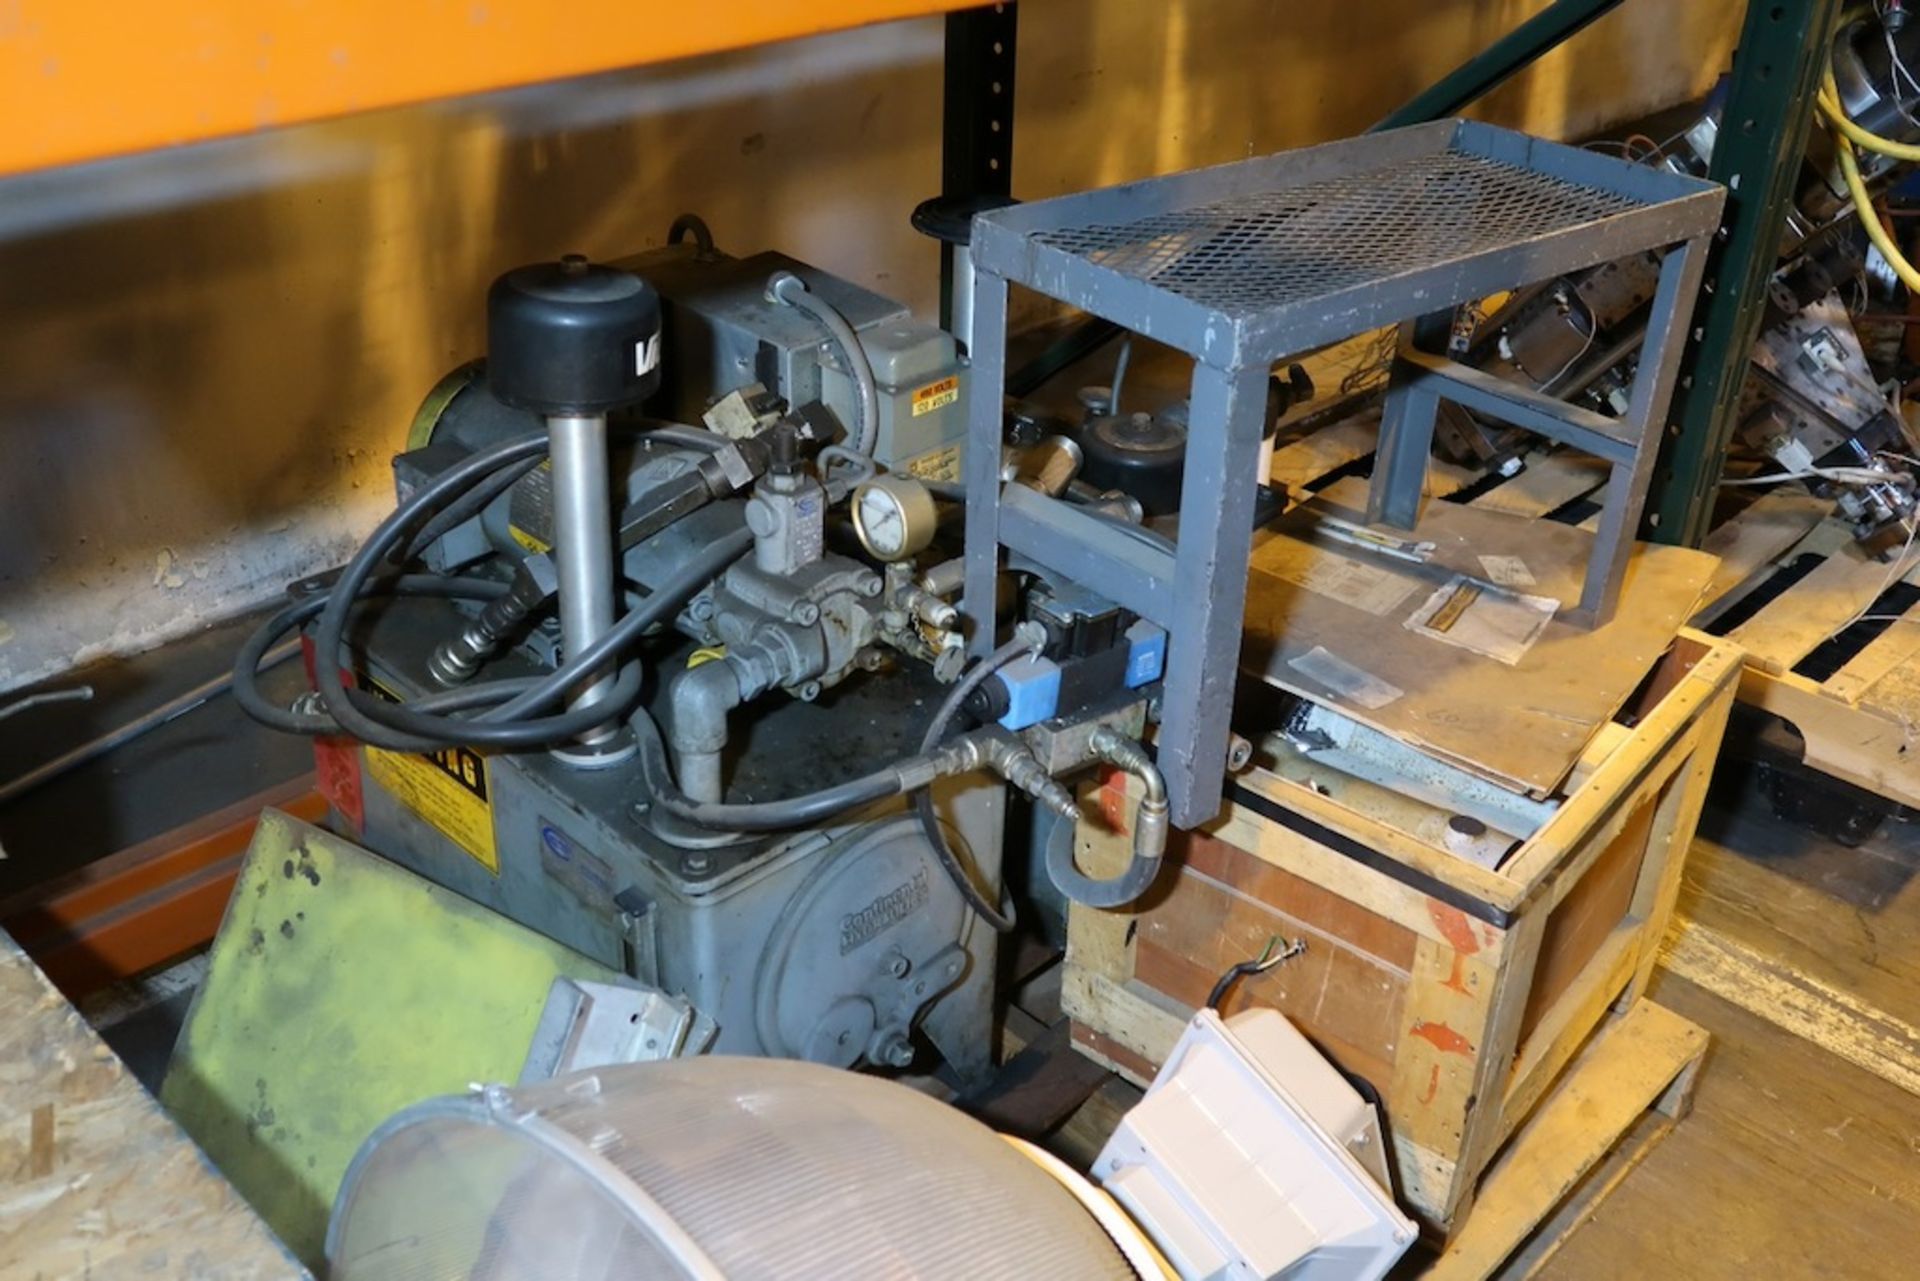 Contents of (1) Sections of Pallet Racking, Including Misc. Machine Parts, Etc. - Image 6 of 7